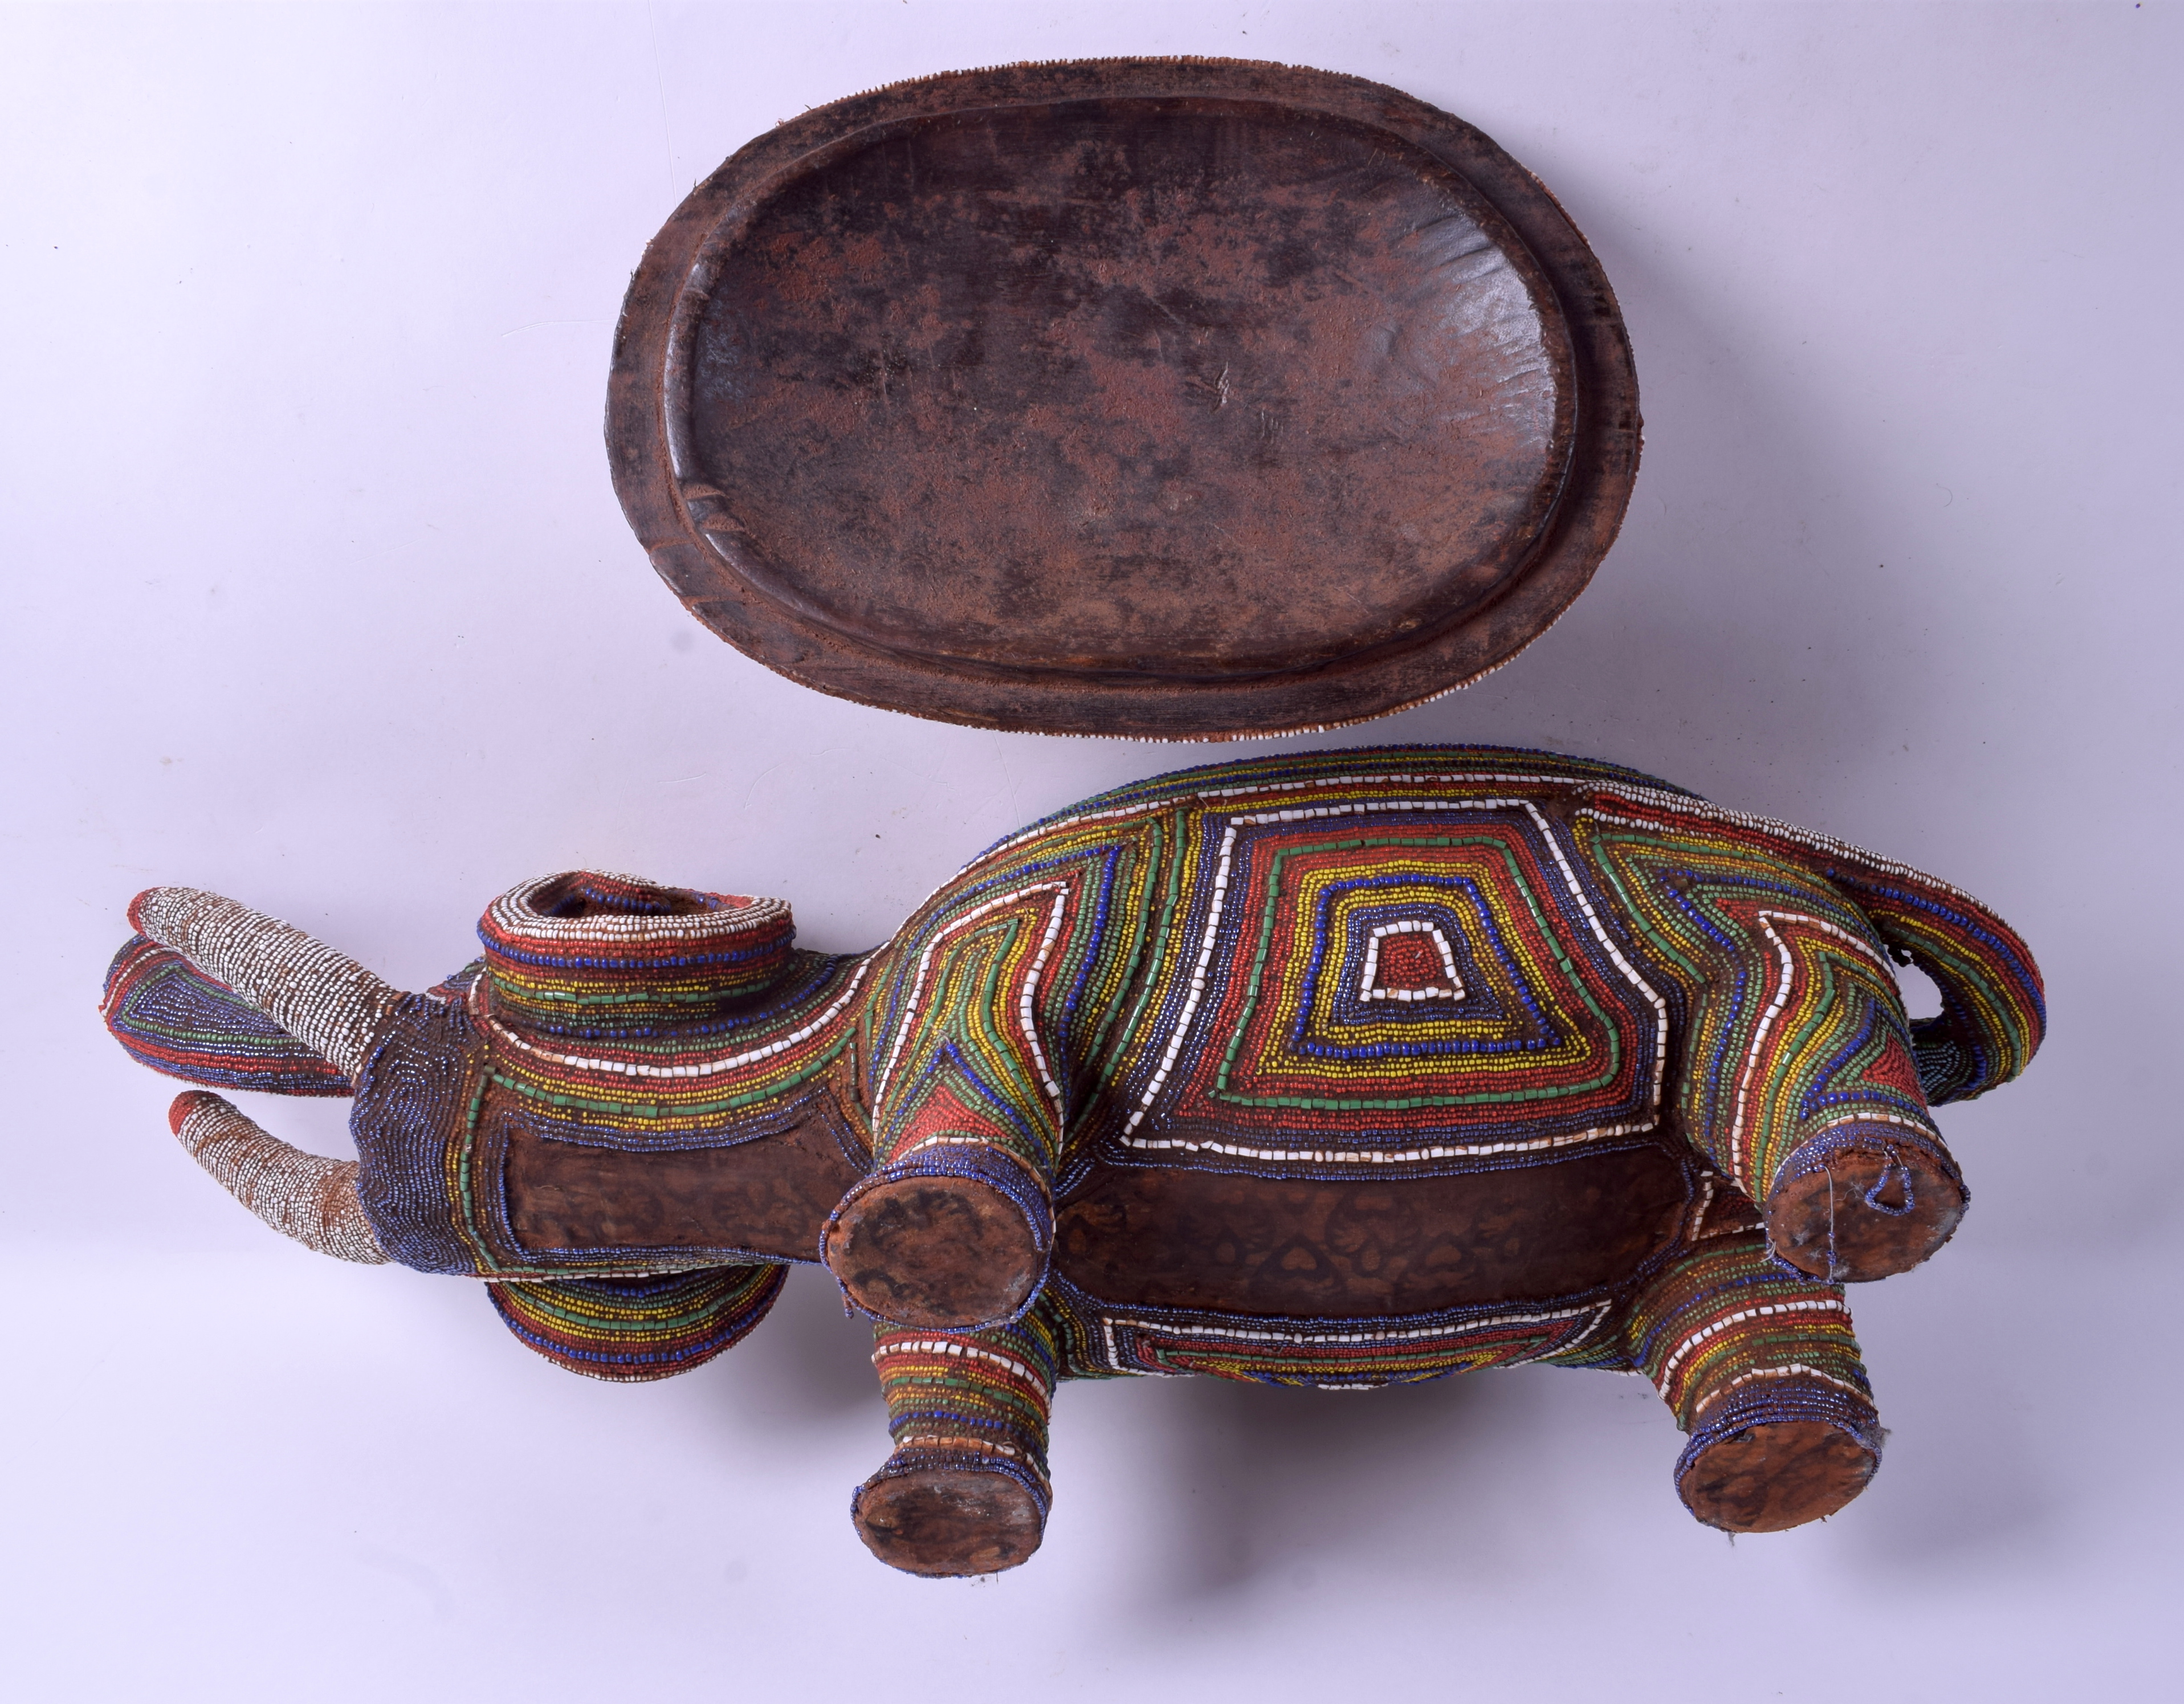 A LARGE AFRICAN TRIBAL BEADWORK CARVED WOOD ELEPHANT BOX AND COVER possibly Cameroon. 70 cm x 30 cm - Image 4 of 4